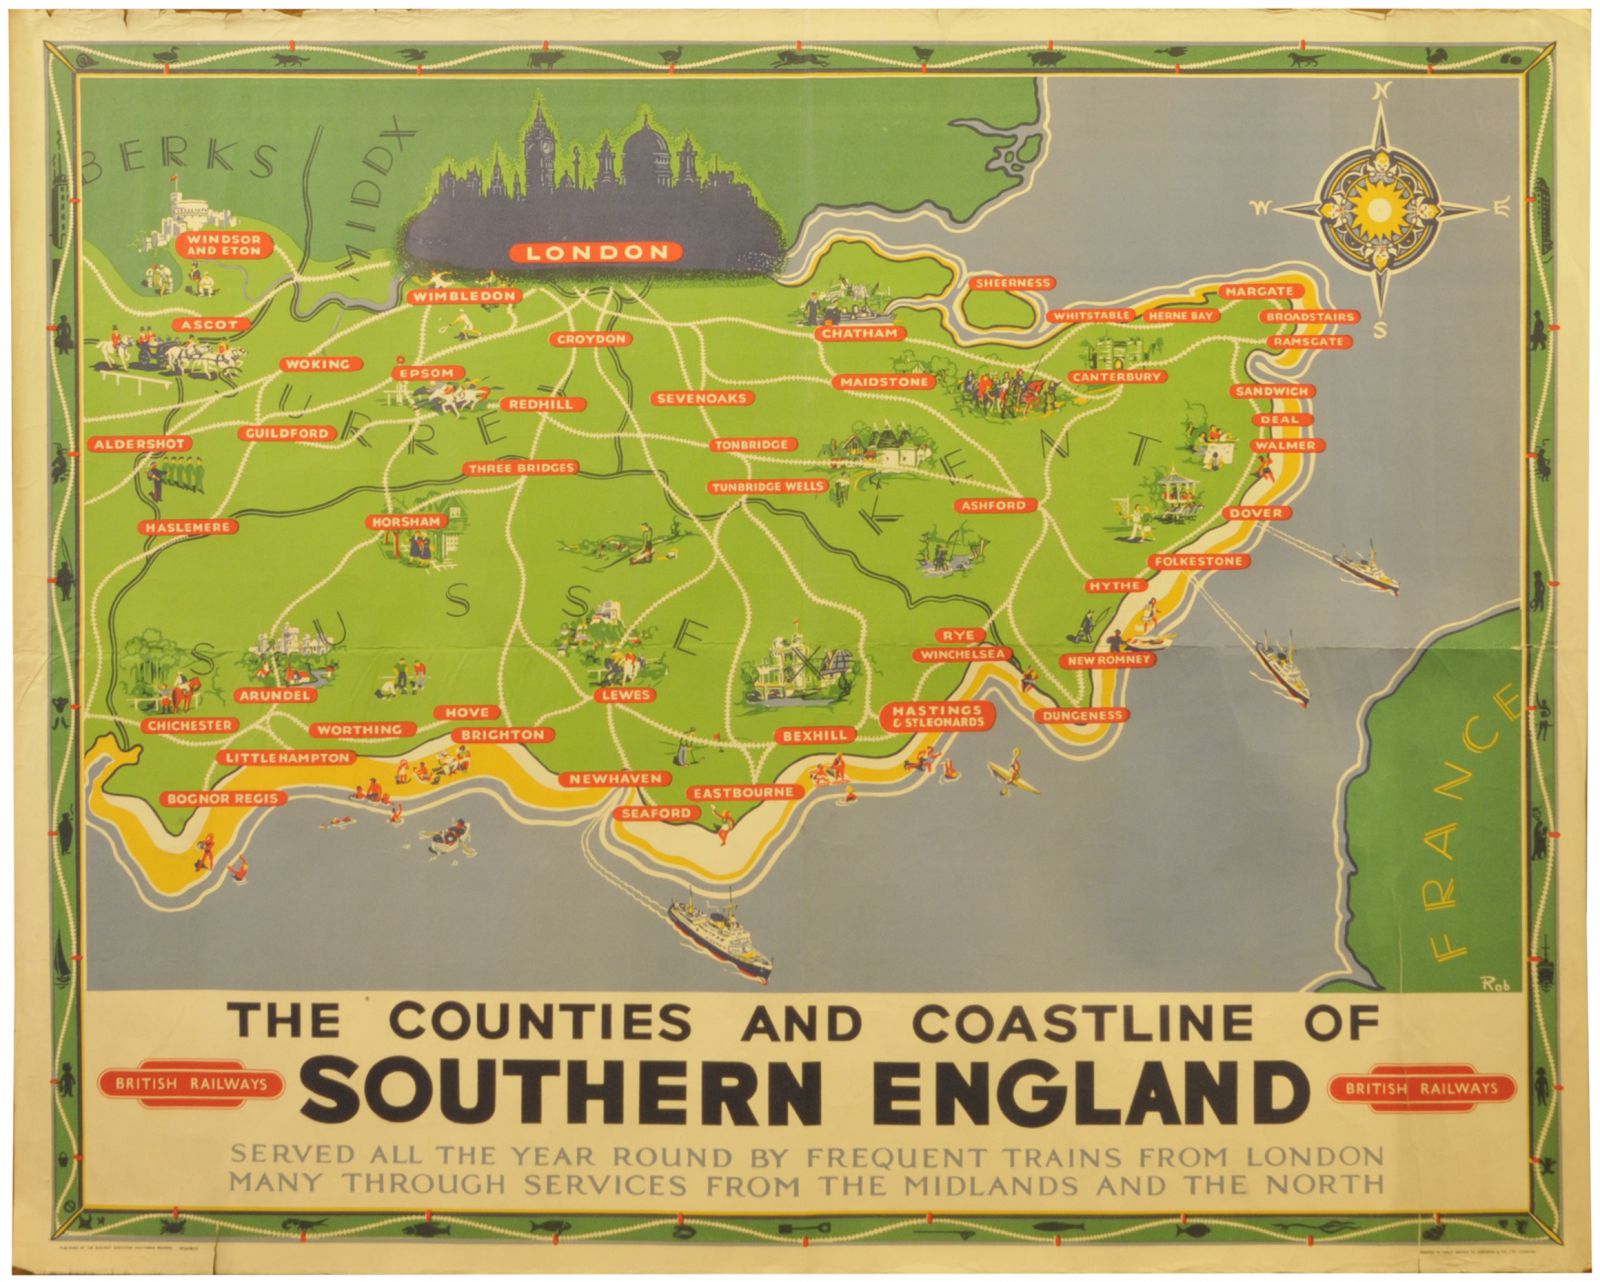 Railway Posters, Southern England, Rob: A BR(S) quad royal poster, The Counties and Coastline of